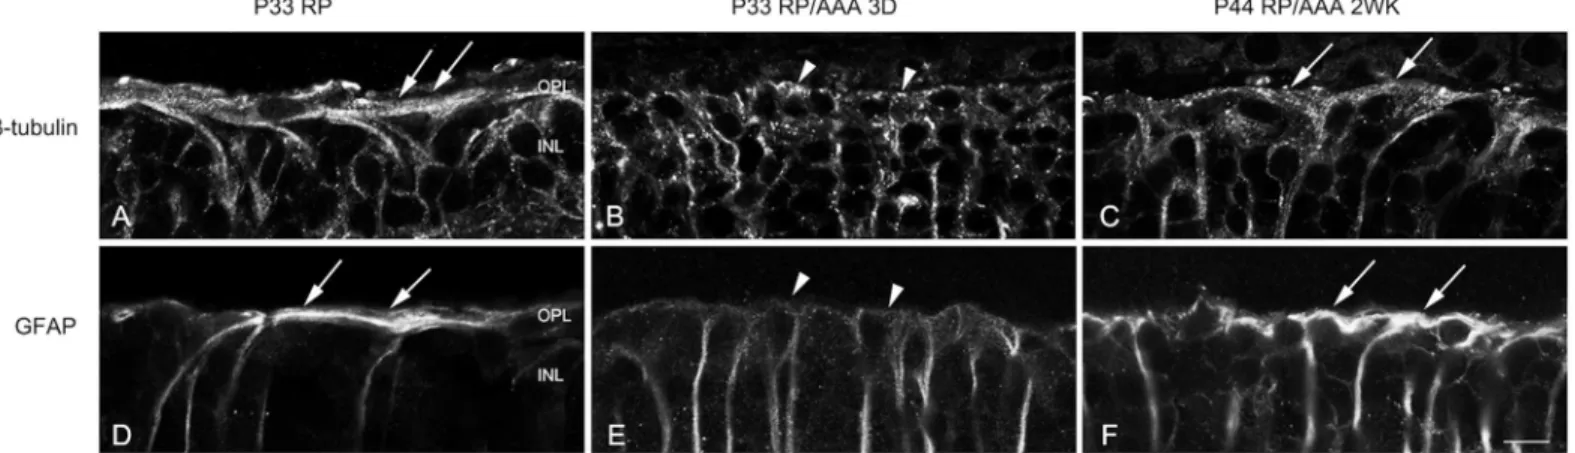 Fig 2. AAA transiently disrupts the distal glial sealing in the RP retina. Confocal micrographs of vertical sections labeled with ß-tubulin (A-C) and GFAP (D-F) in saline treated RP (A, D) and AAA treated RP retinas after 3 days (B, E) and 2 weeks (C, F)